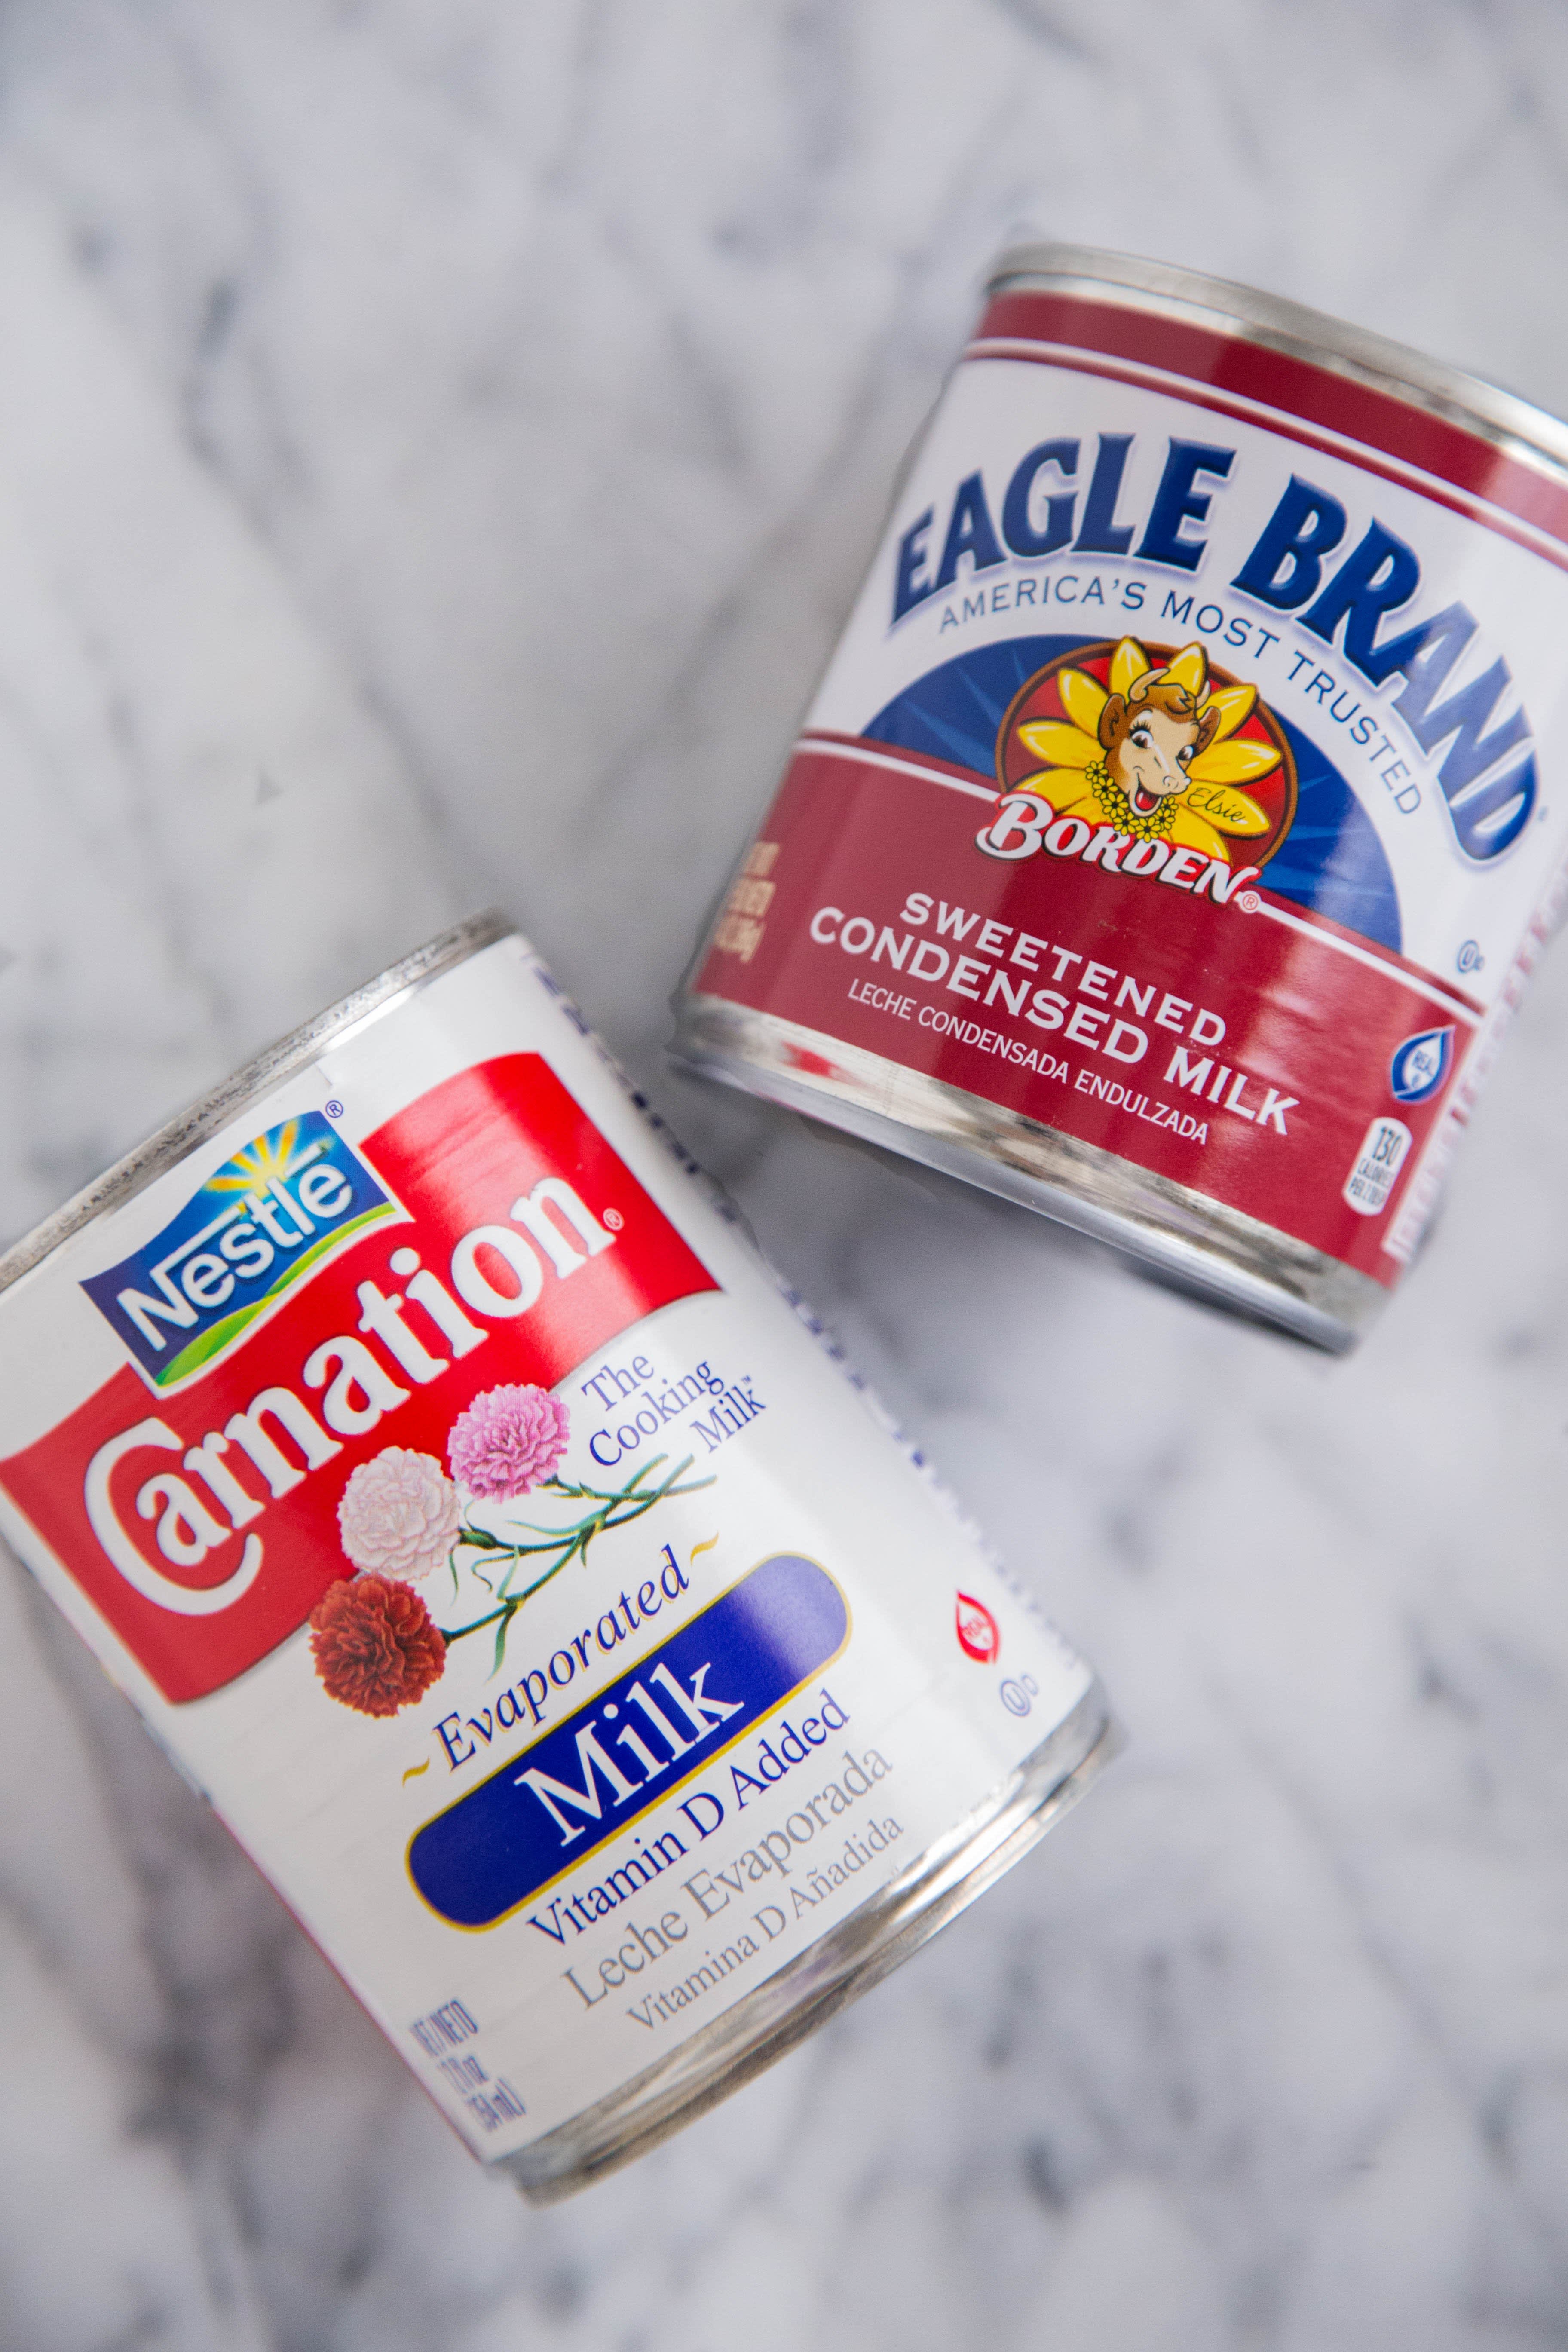 carnation evaporated milk macaroni and cheese